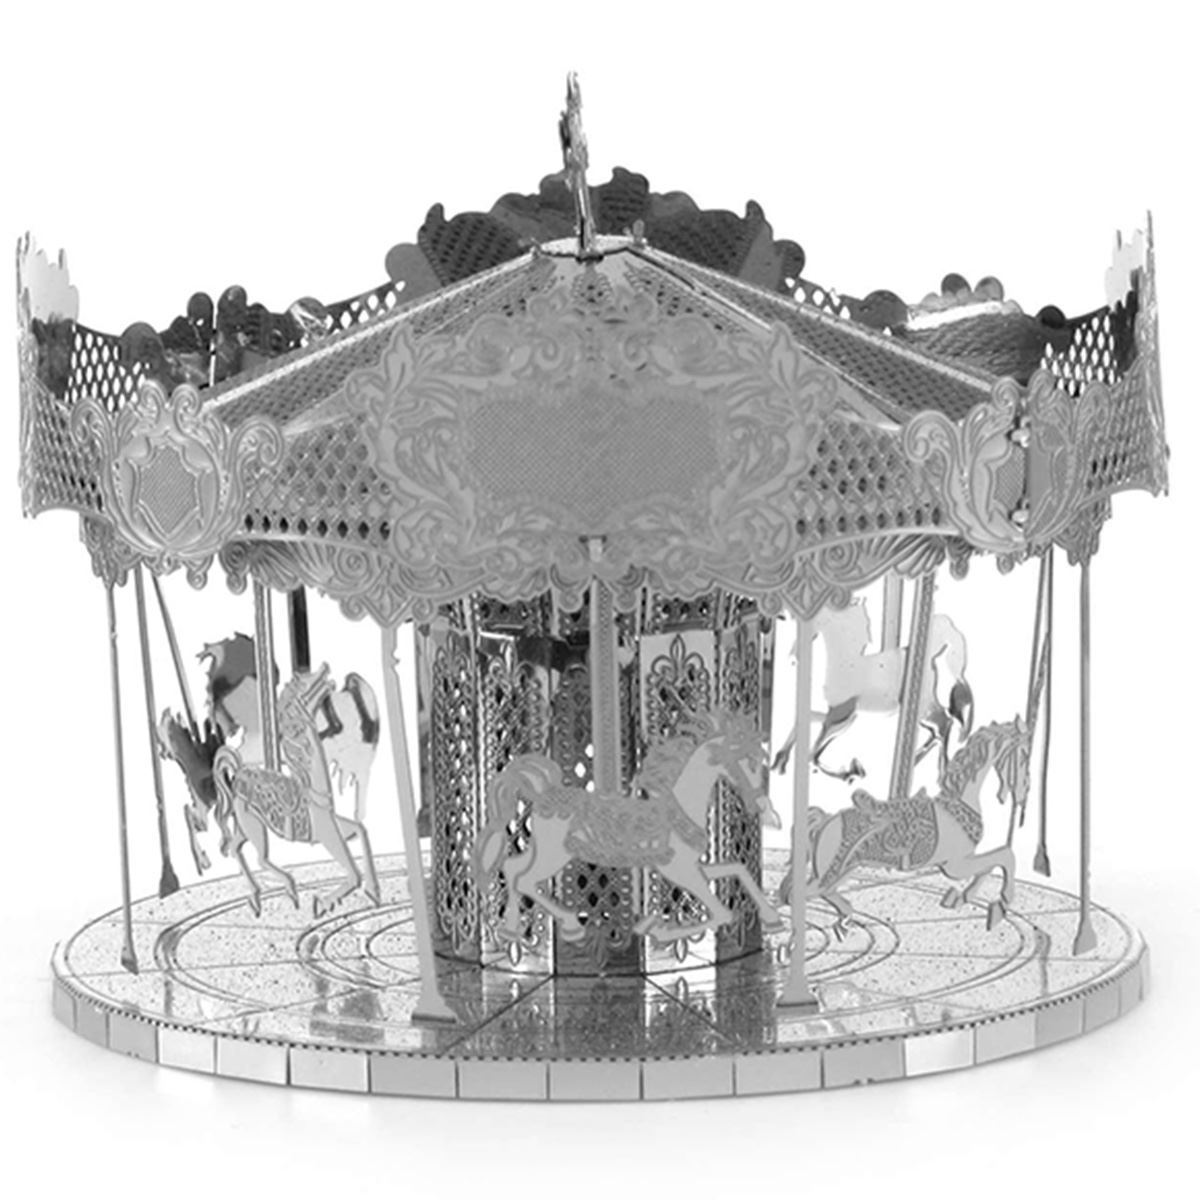 Metal Earth Merry Go Round 3D Metal Model kit/Fascinations Inc 